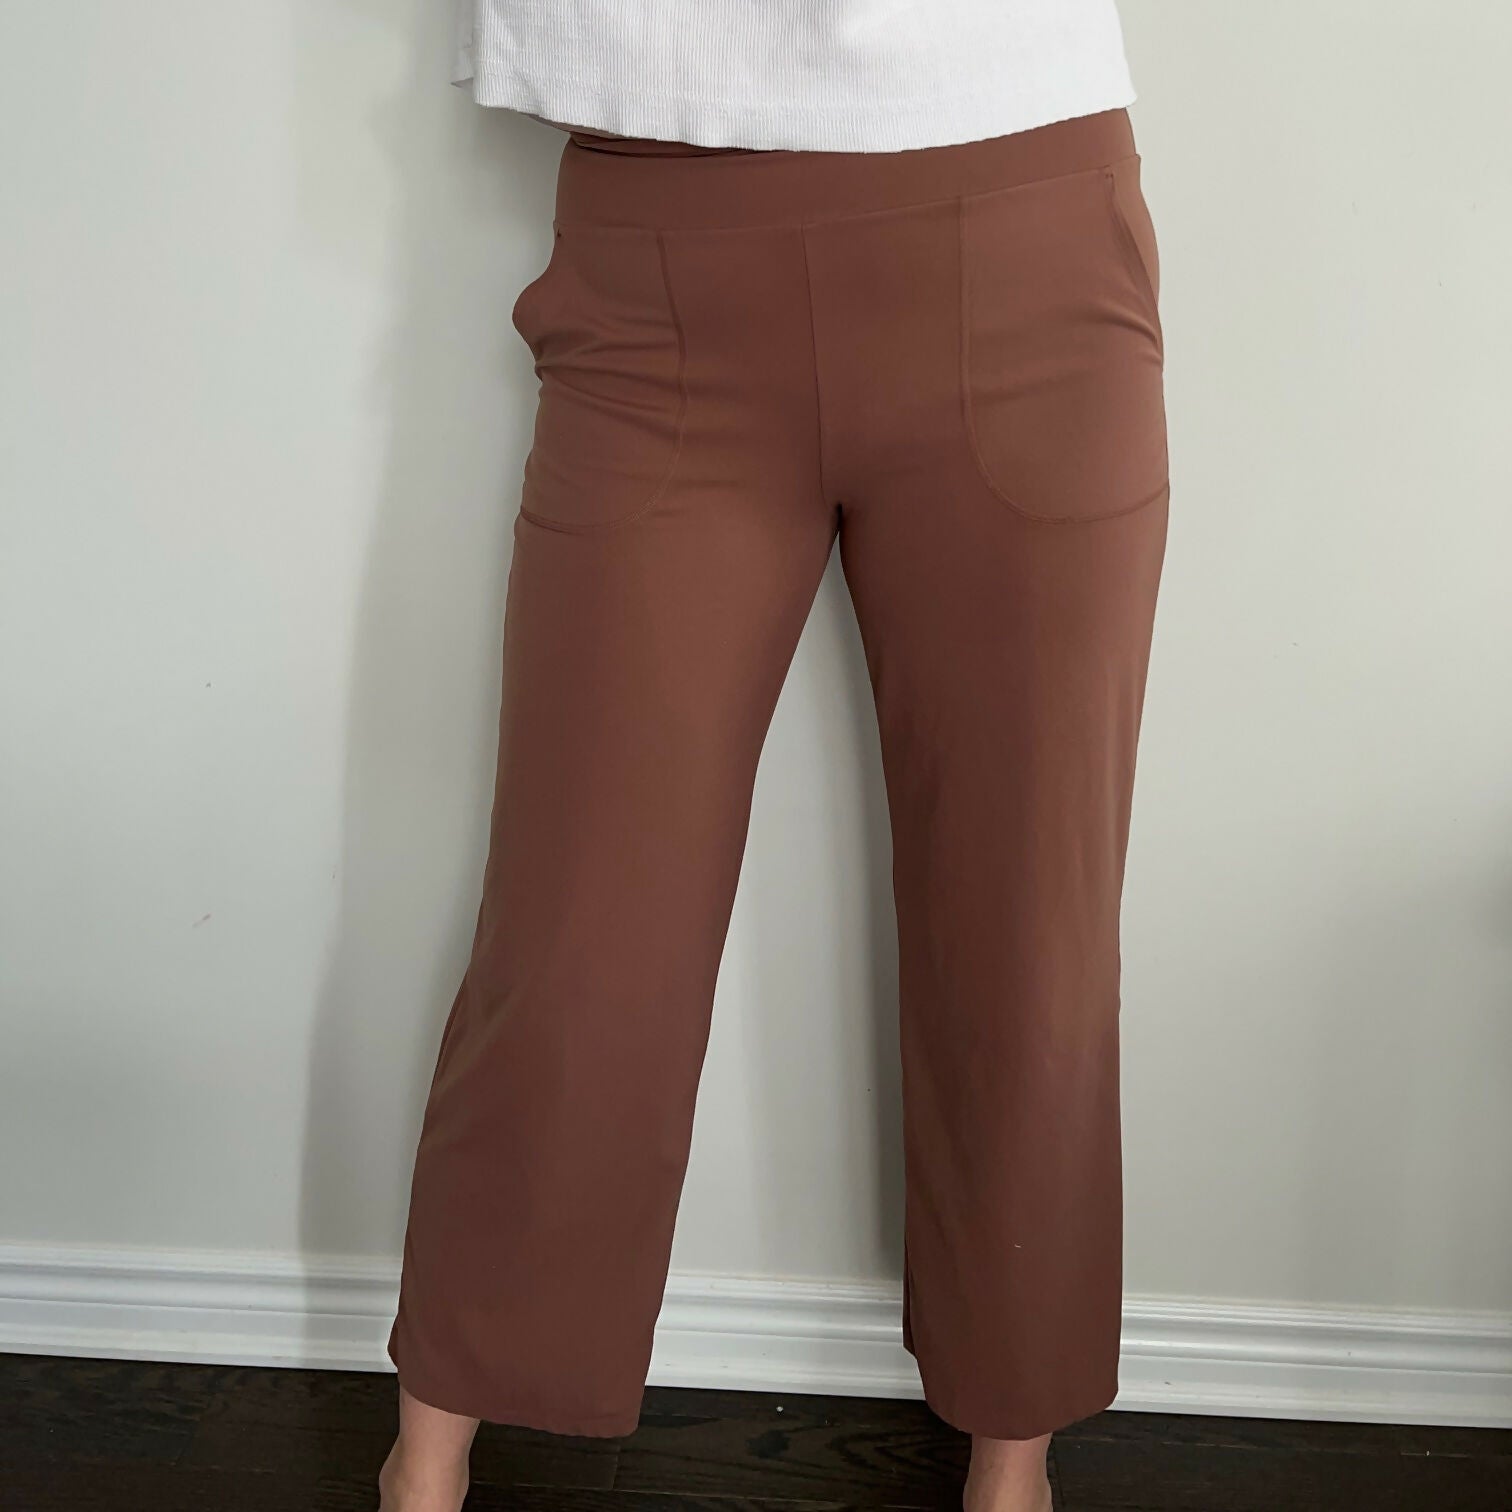 HandsTAYmped Designs | Spring Flare Pant